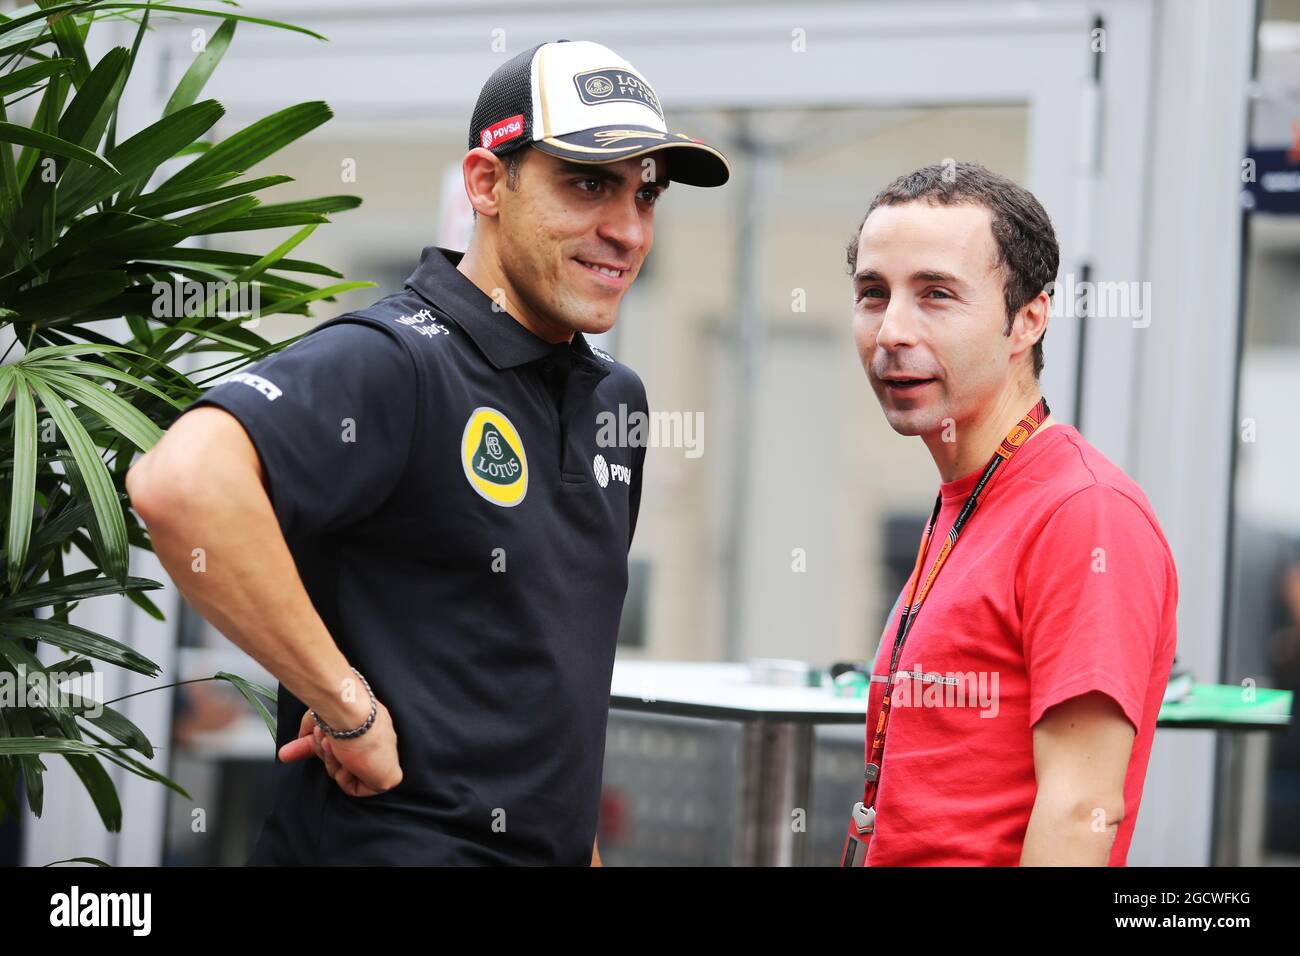 L to R): Pastor Maldonado (VEN) Lotus F1 Team with Nicolas Todt (FRA)  Driver Manager. United States Grand Prix, Thursday 22nd October 2015.  Circuit of the Americas, Austin, Texas, USA Stock Photo -